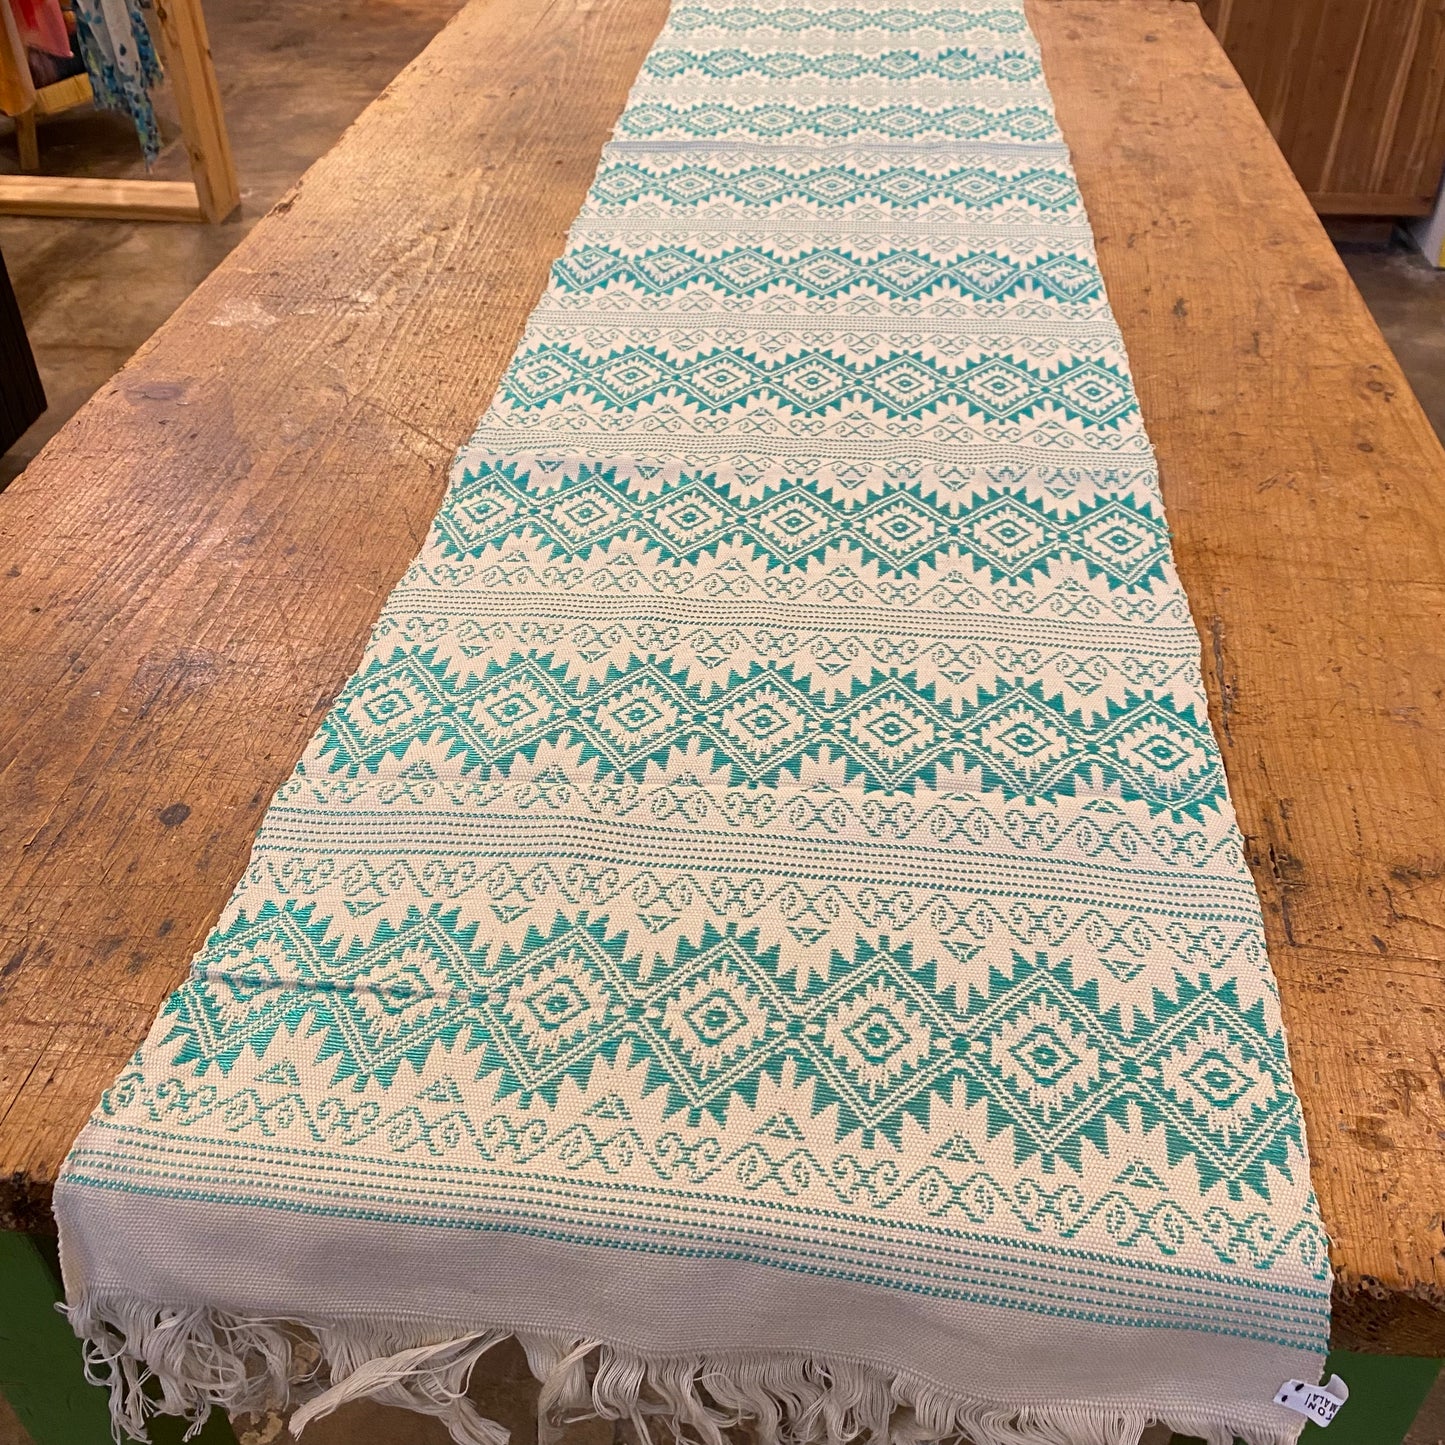 Comalapa Table Runner from Guatemala- White and Turquoise